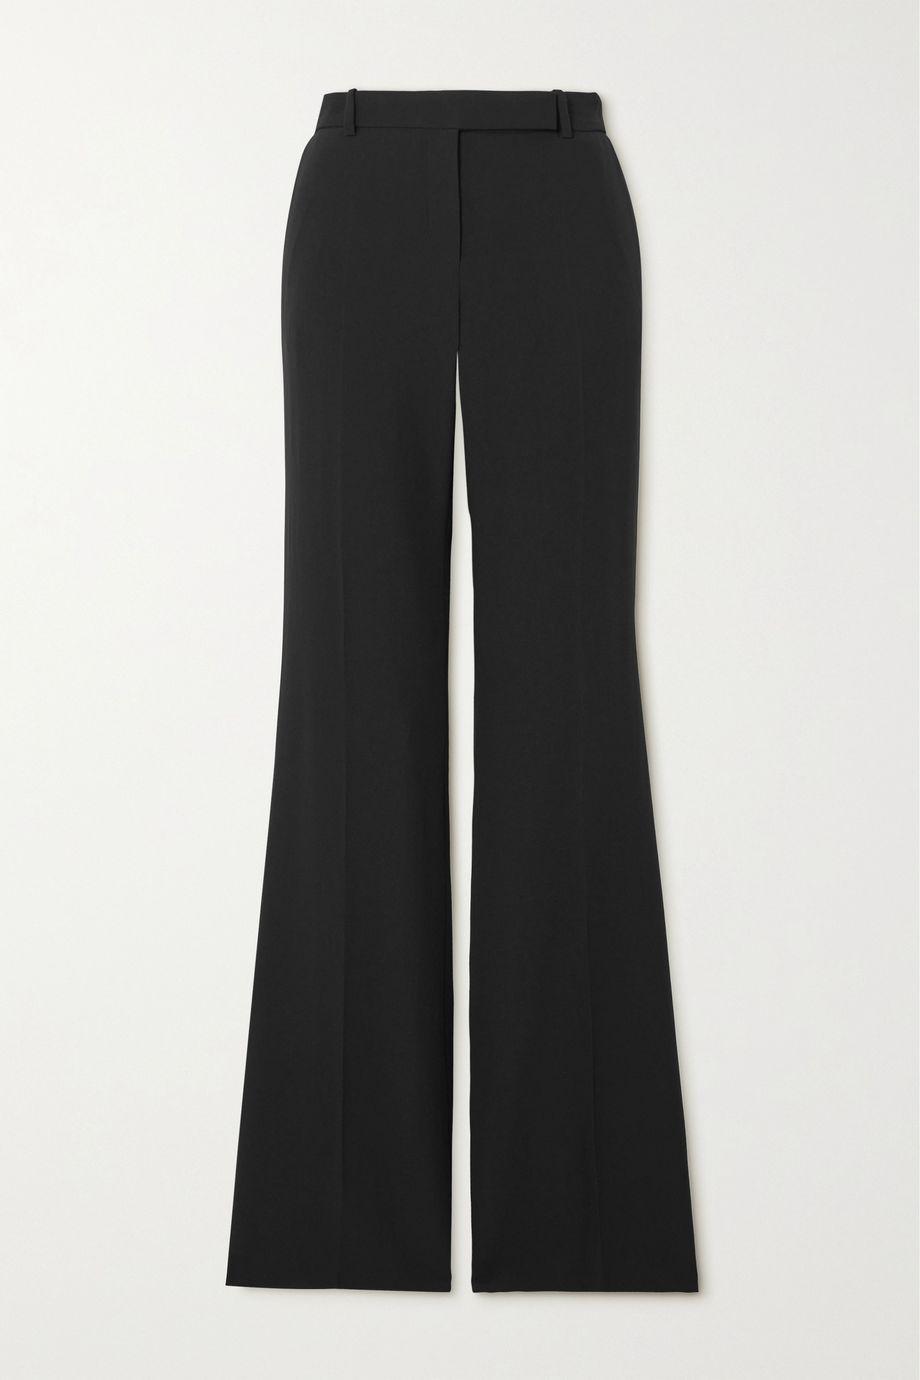 Crepe flared pants by ALEXANDER MCQUEEN